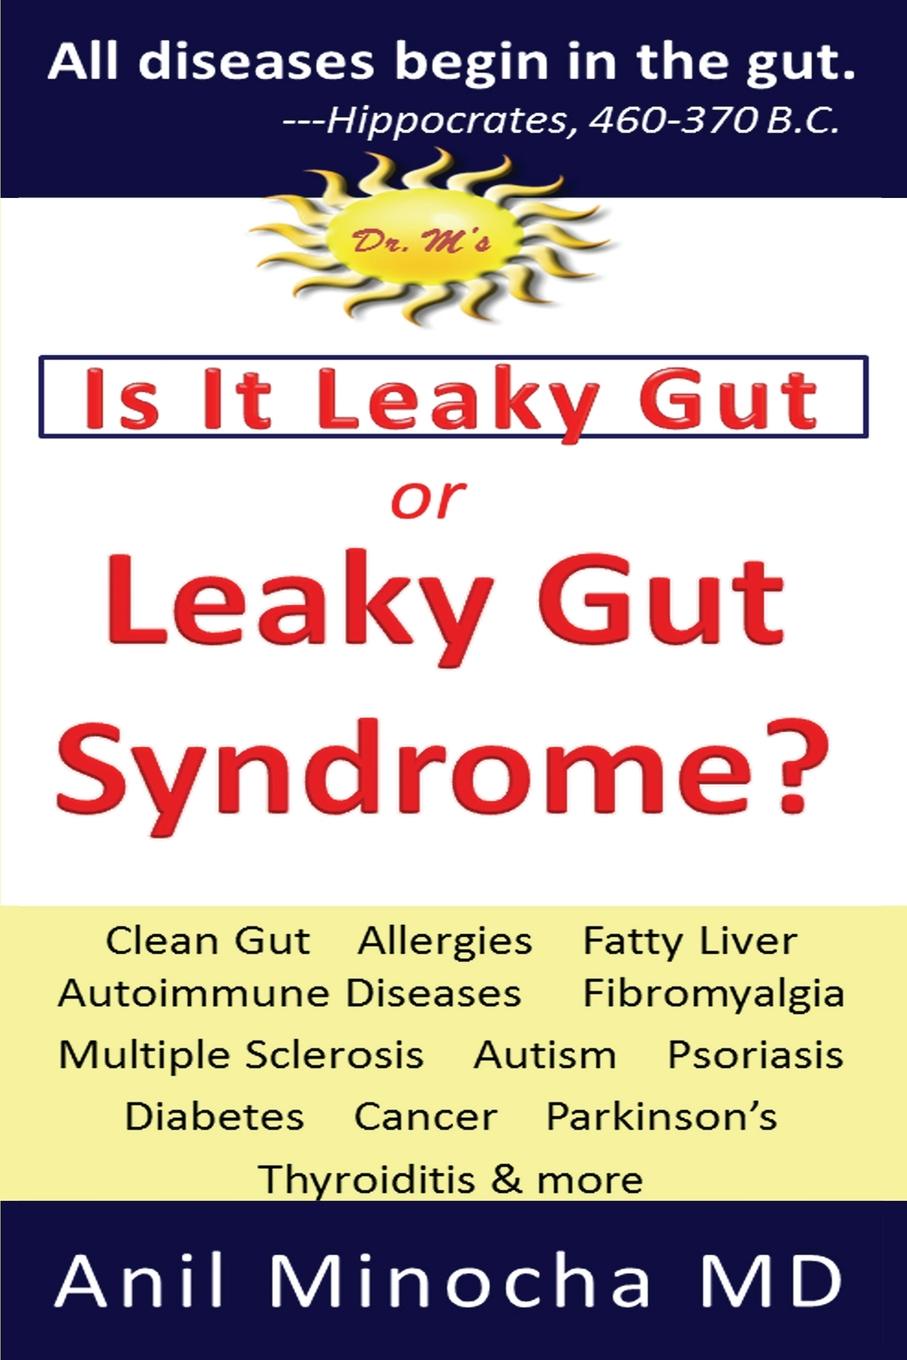 Is It Leaky Gut or Leaky Gut Syndrome. Clean Gut,  Allergies,  Fatty Liver,  Autoimmune Diseases,  Fibromyalgia,  Multiple Sclerosis,  Autism,  Psoriasis,  Diabetes,  Cancer,  Parkinson.s, Thyroiditis,  .  More